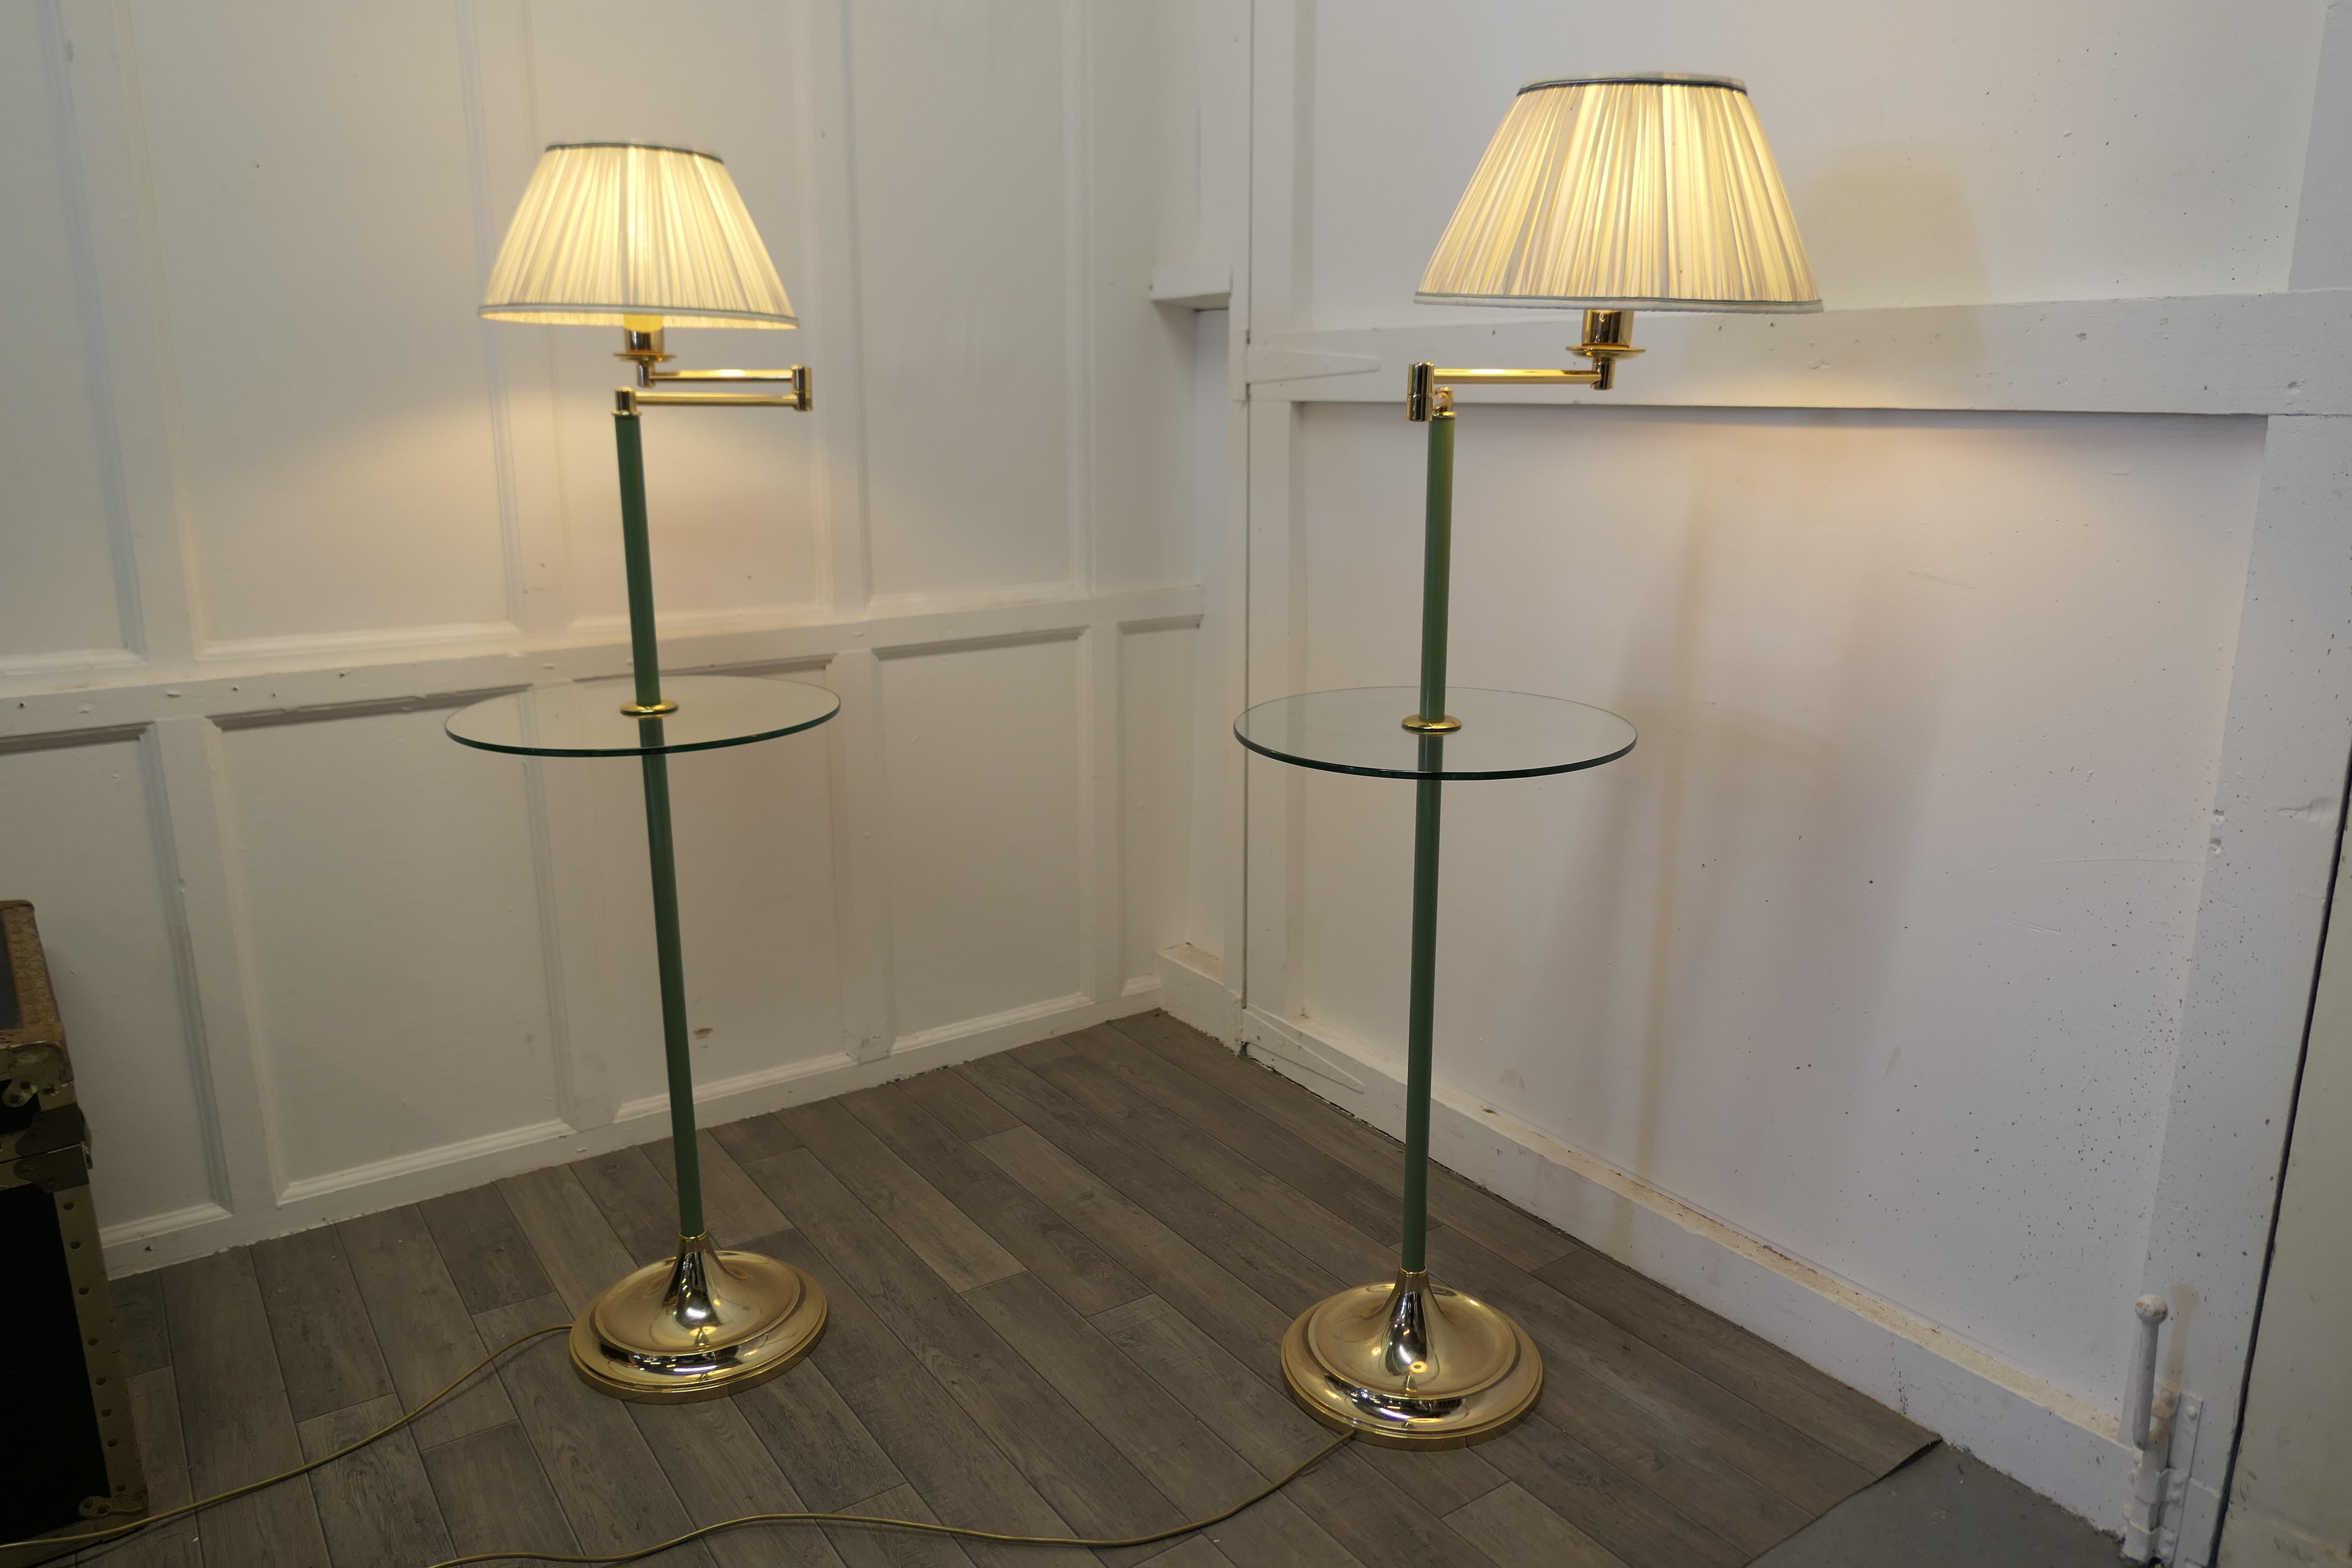 Pair of French Art Deco Adjustable Swing Arm Floor Lamps, Reading Lamps In Good Condition For Sale In Chillerton, Isle of Wight